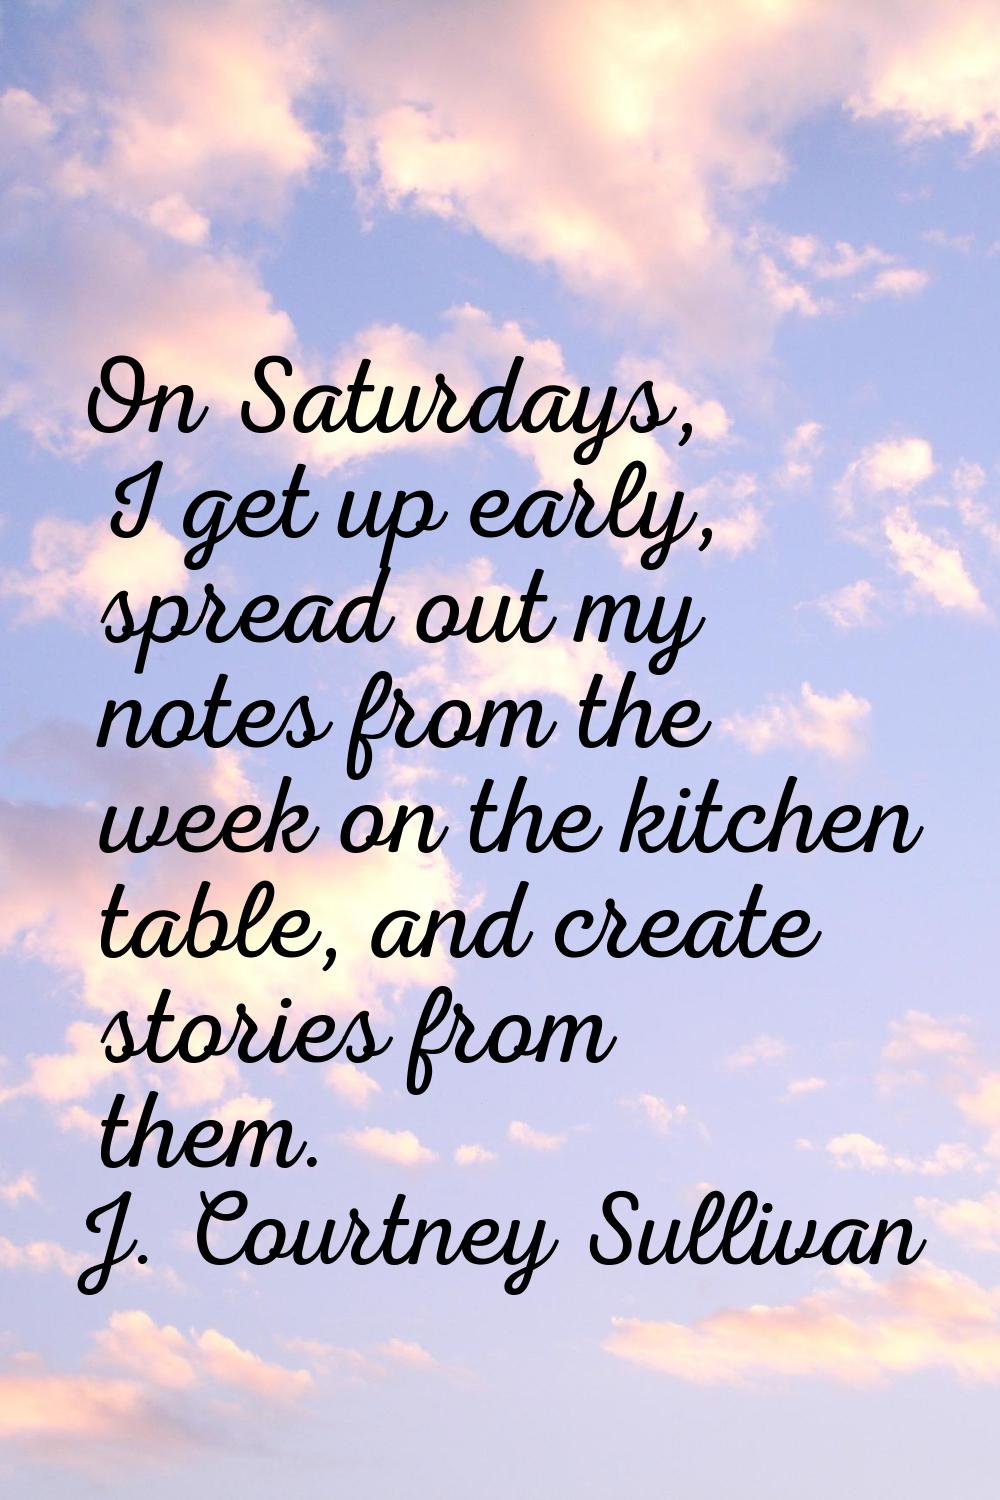 On Saturdays, I get up early, spread out my notes from the week on the kitchen table, and create st